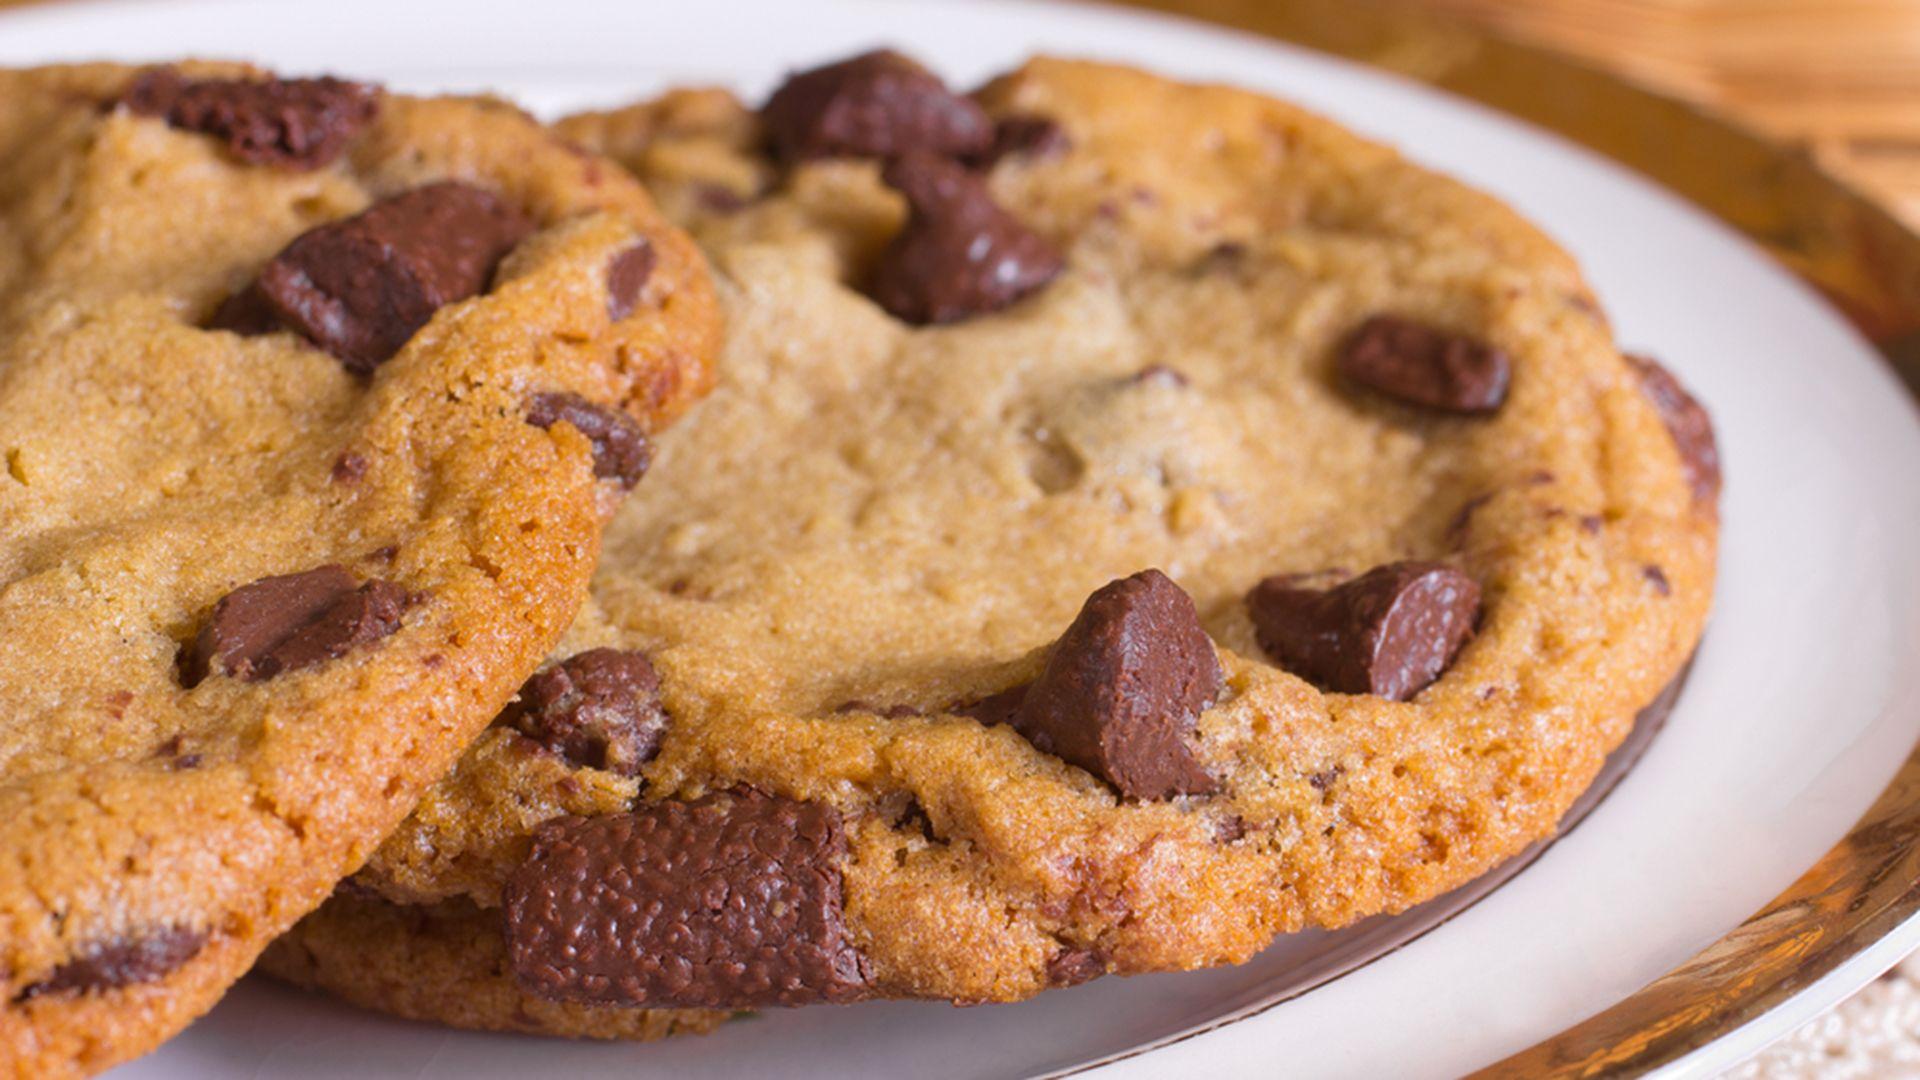 Enjoy a Free Cookie on National Chocolate Chip Cookie Day!